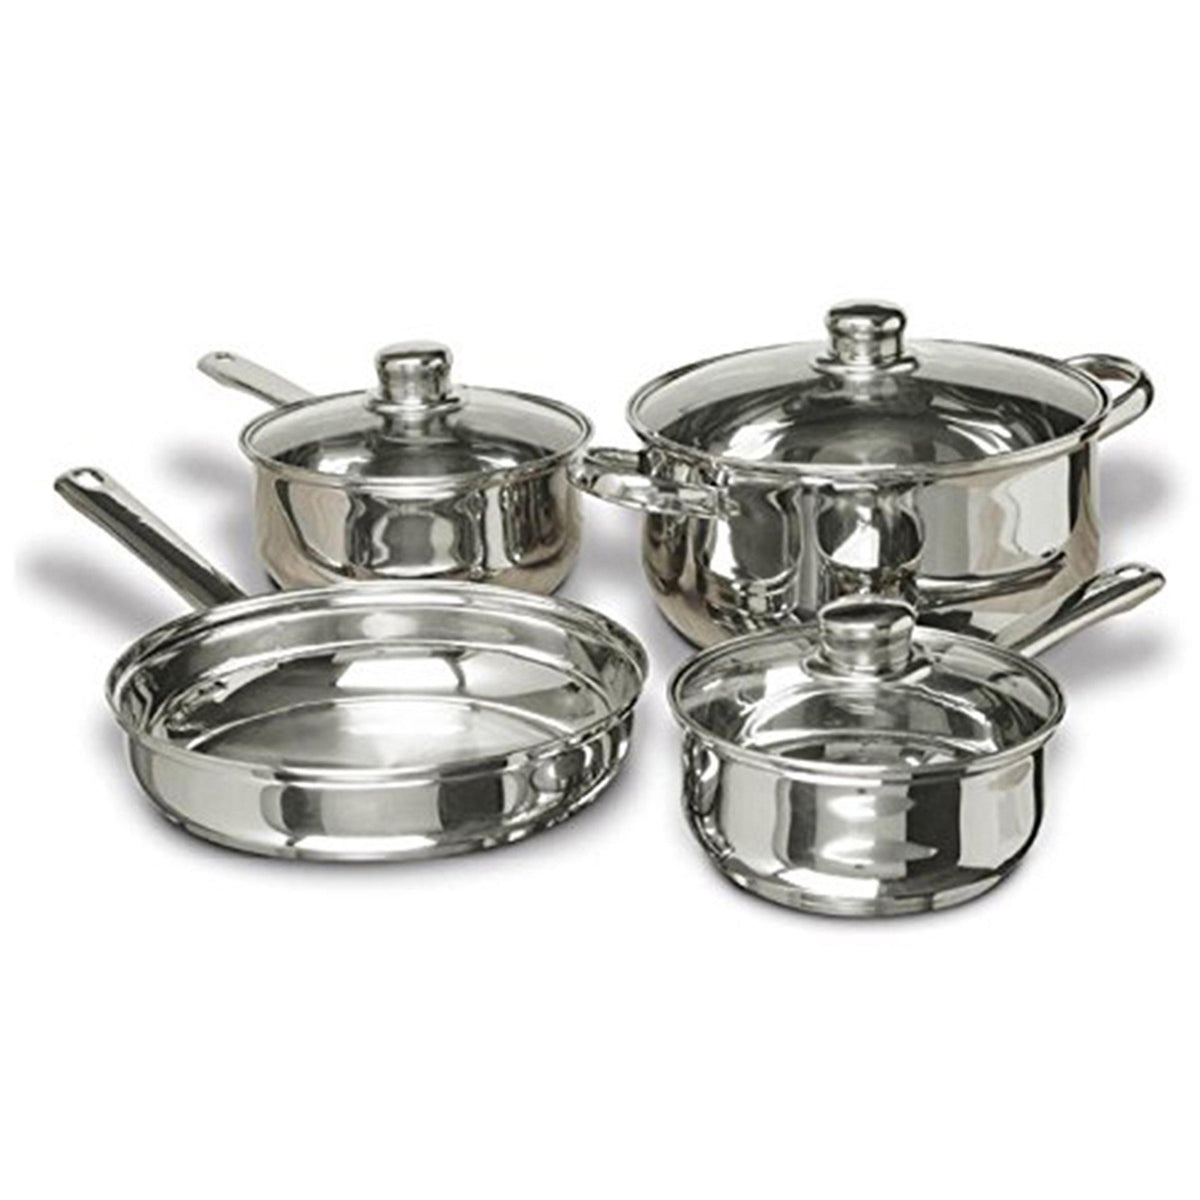 7-Piece Stainless Steel Bundle